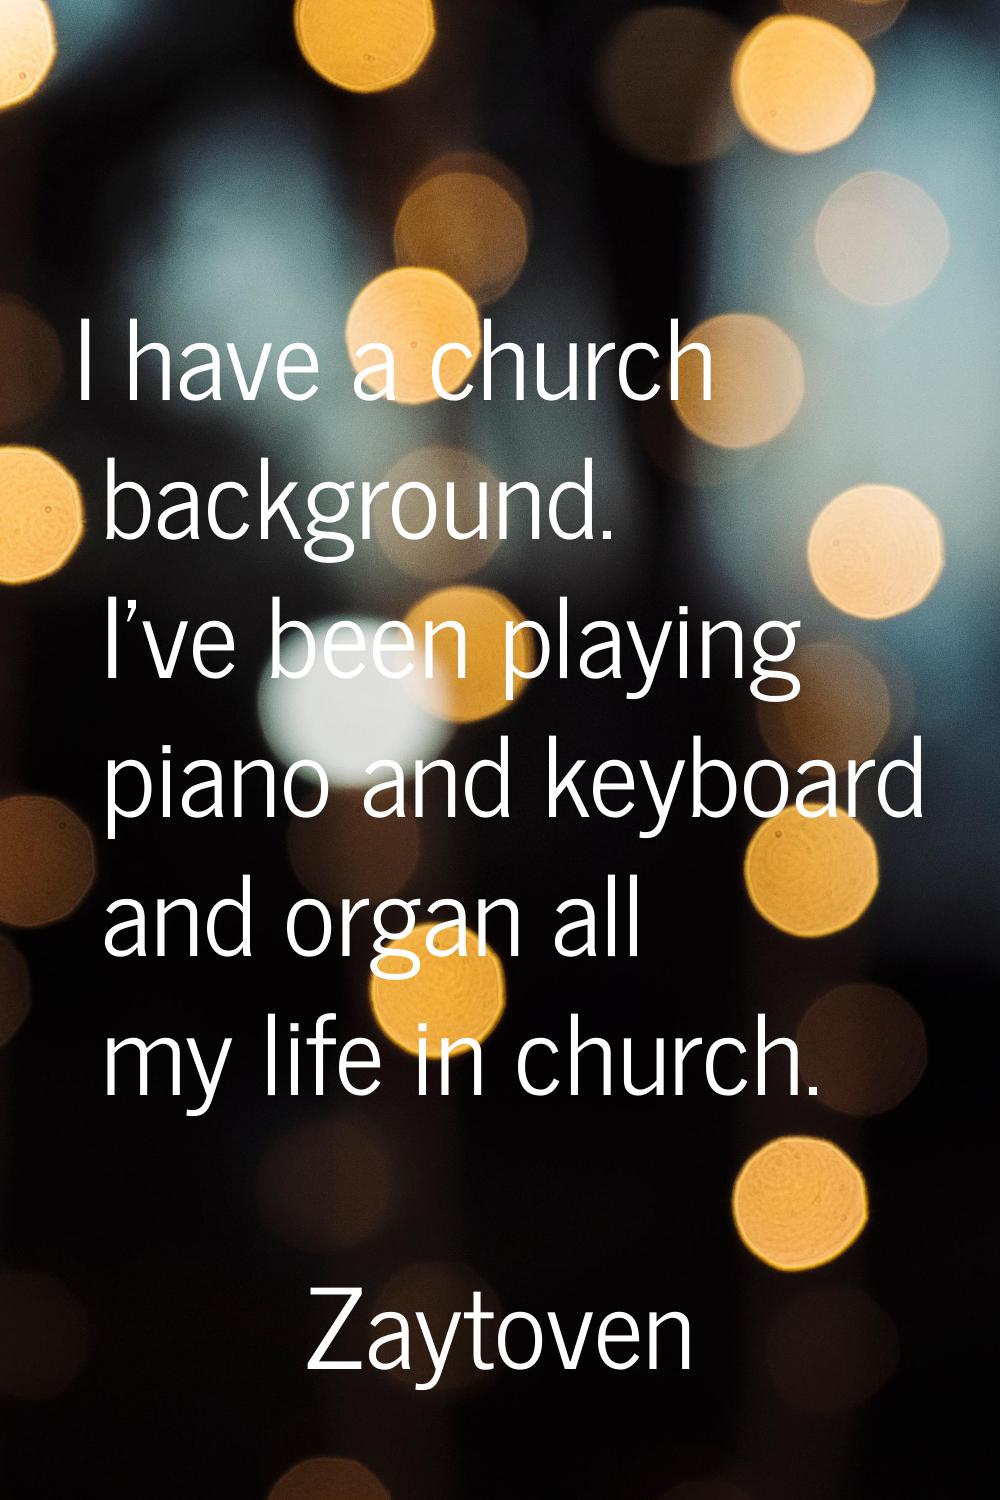 I have a church background. I've been playing piano and keyboard and organ all my life in church.